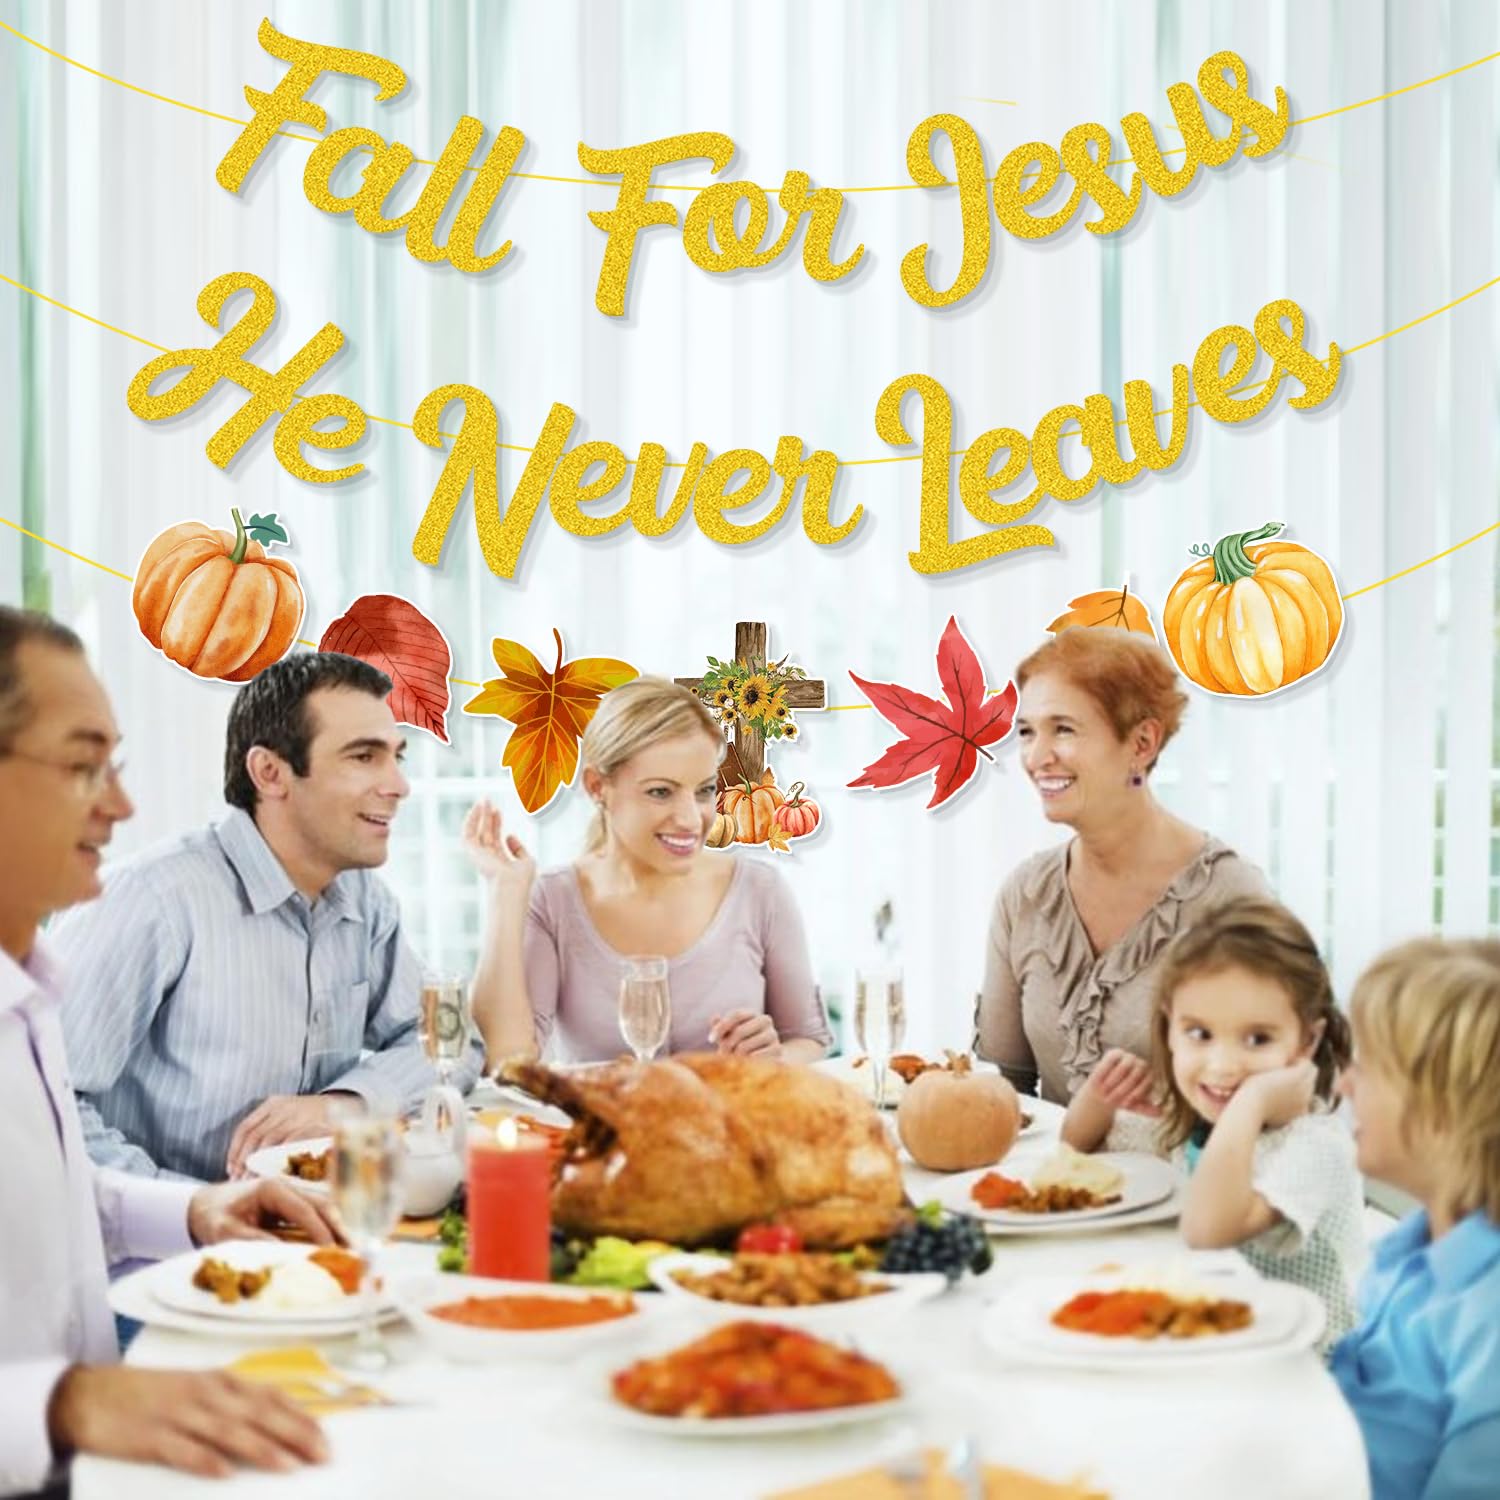 Fall For Jesus He Never Leaves Banner,NO-DIY Pumpkin Fall Banner Maple Leaf Bible Decoration Christian Religion Happy Fall Banner, Fall for Jesus He Never Leaves Decor Fall Decorations for Office